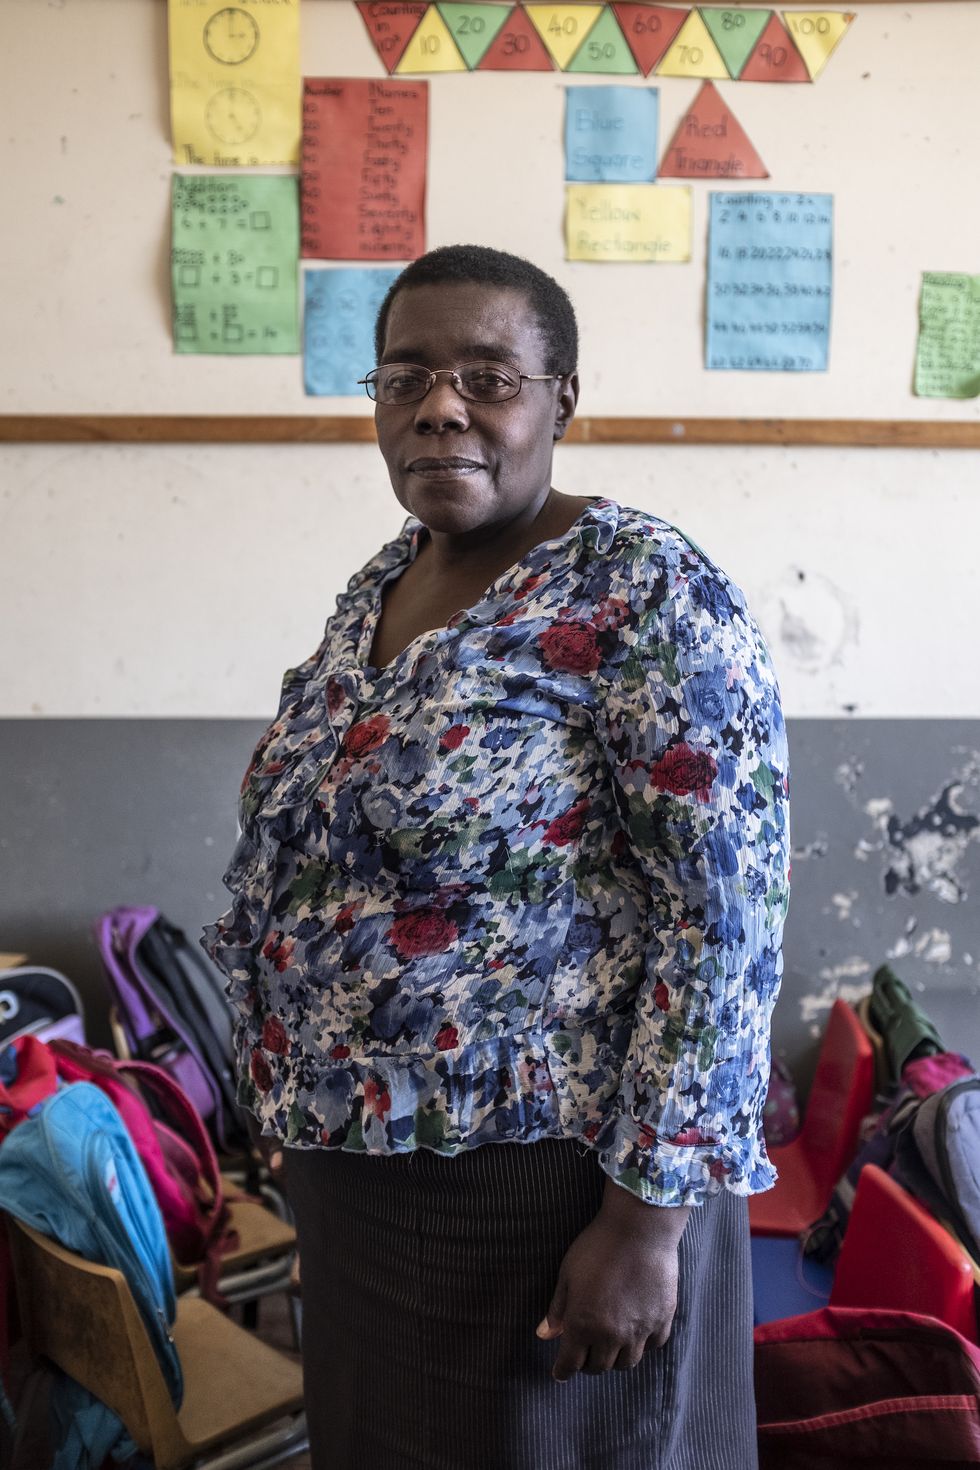 a portrait of judith manjoro, a zimbabwe migrant and former out of work teacher who founded a school for african migrant children in the suburb of yeoville in johannesburg  the school welcomes migrant children who were not admitted to south african public schools because are not able to furnish documents such as birth certificates or immunisation cards, or pay schools fees demanded by private schools 8 october 2019 johannesburg, south africa © miora rajaonary  national geographic